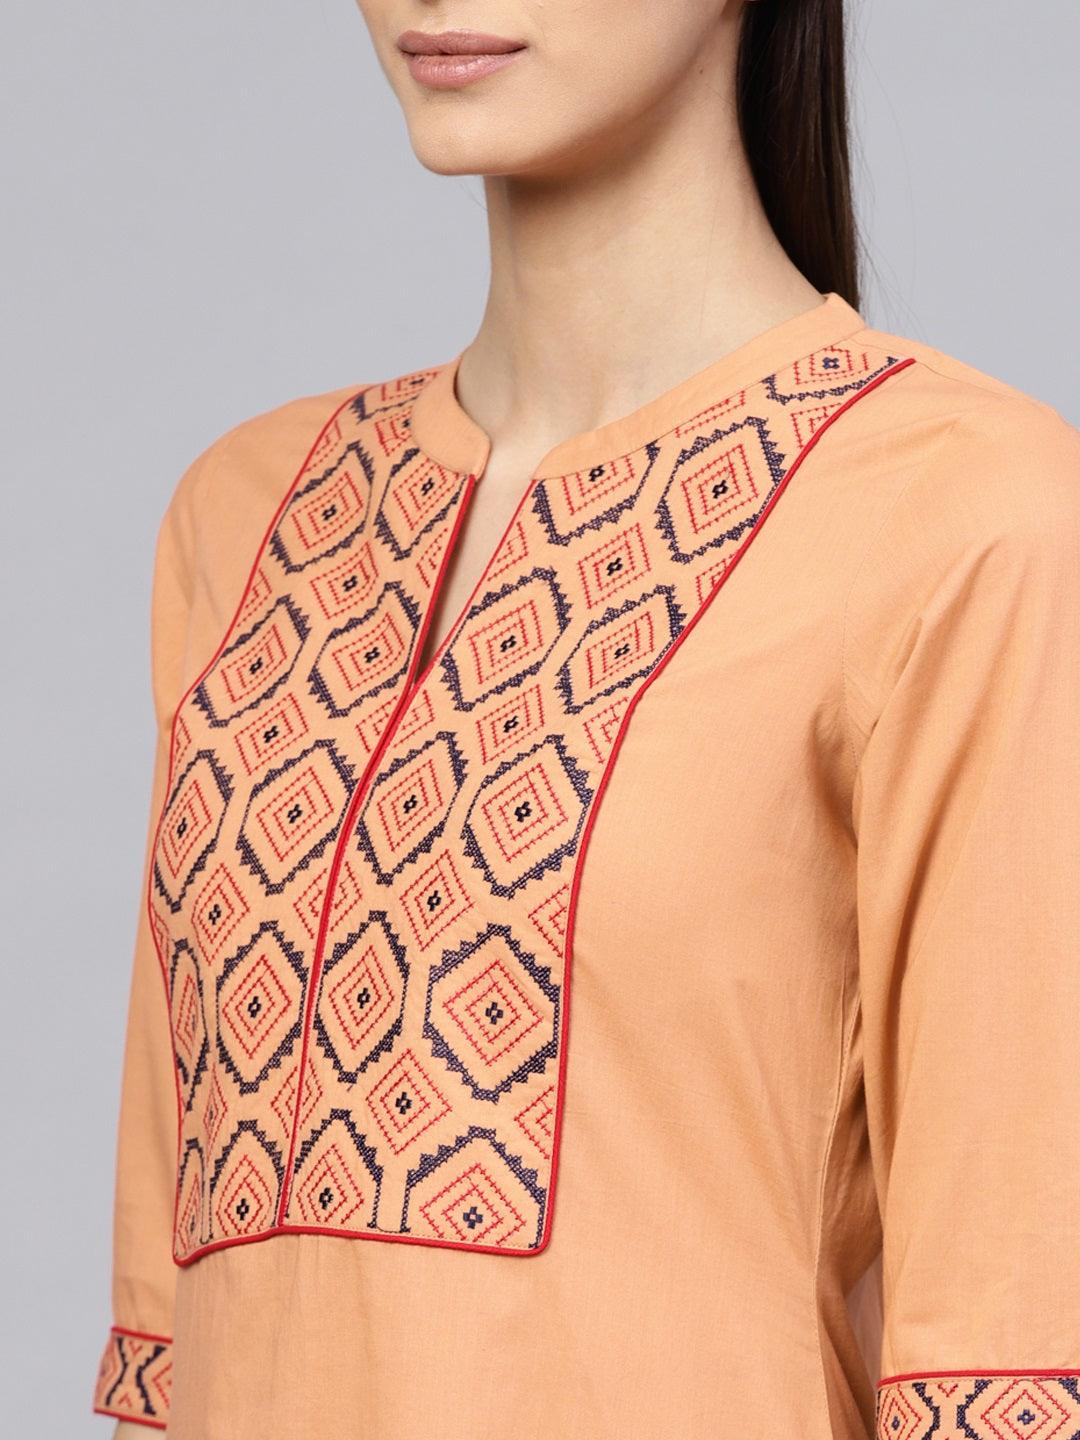 Brown Embroidered Cotton Straight Kurta With Trousers